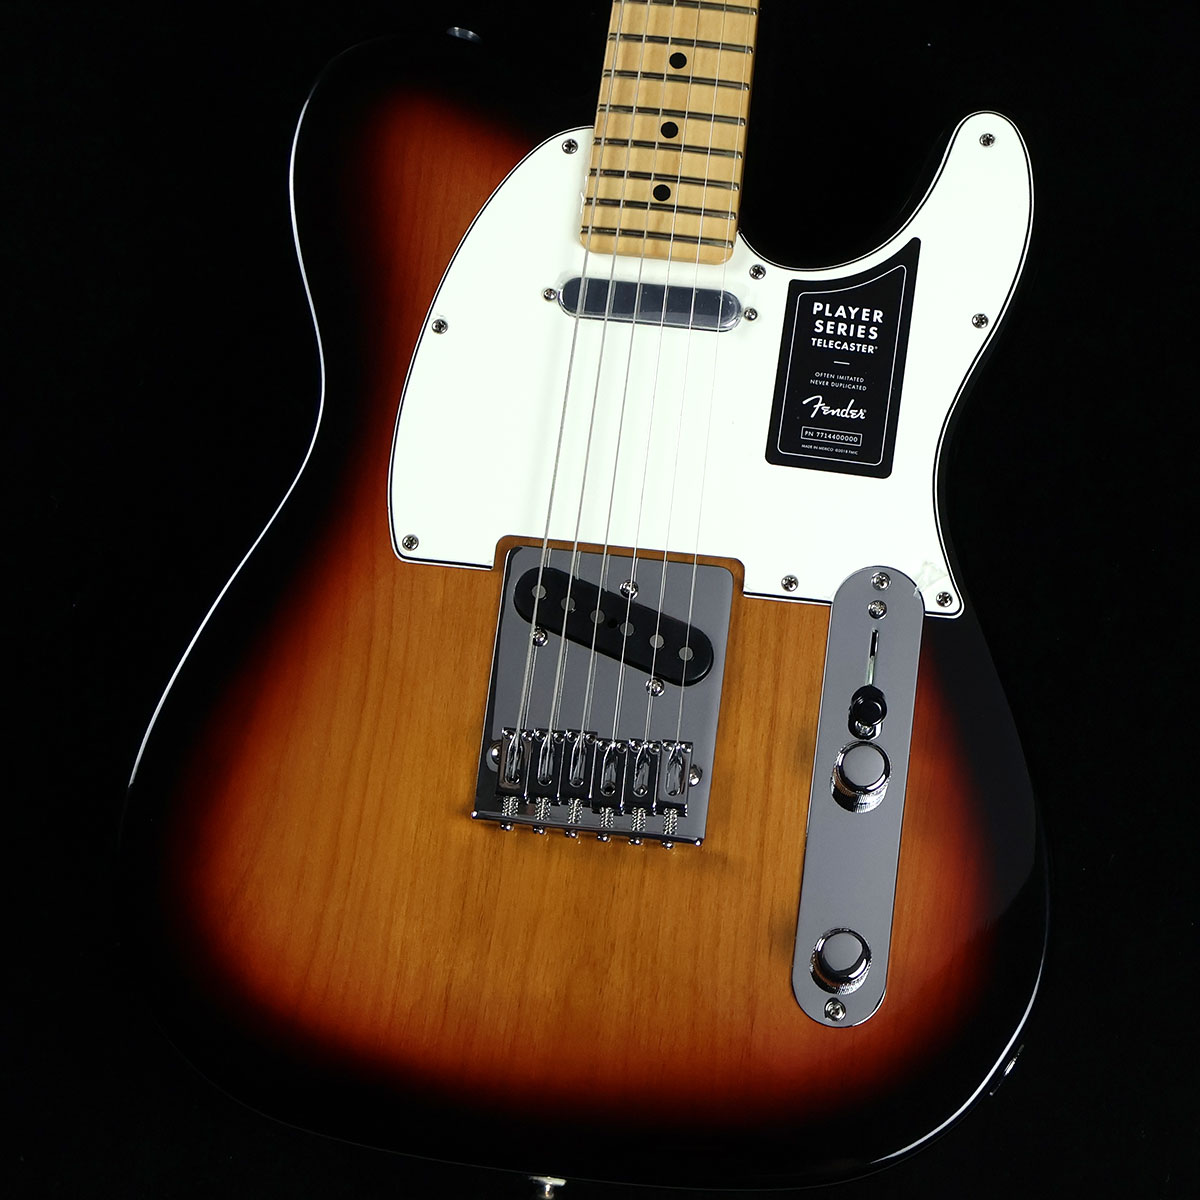 Fender PLAYER TELECASTERフェンダー - ギター